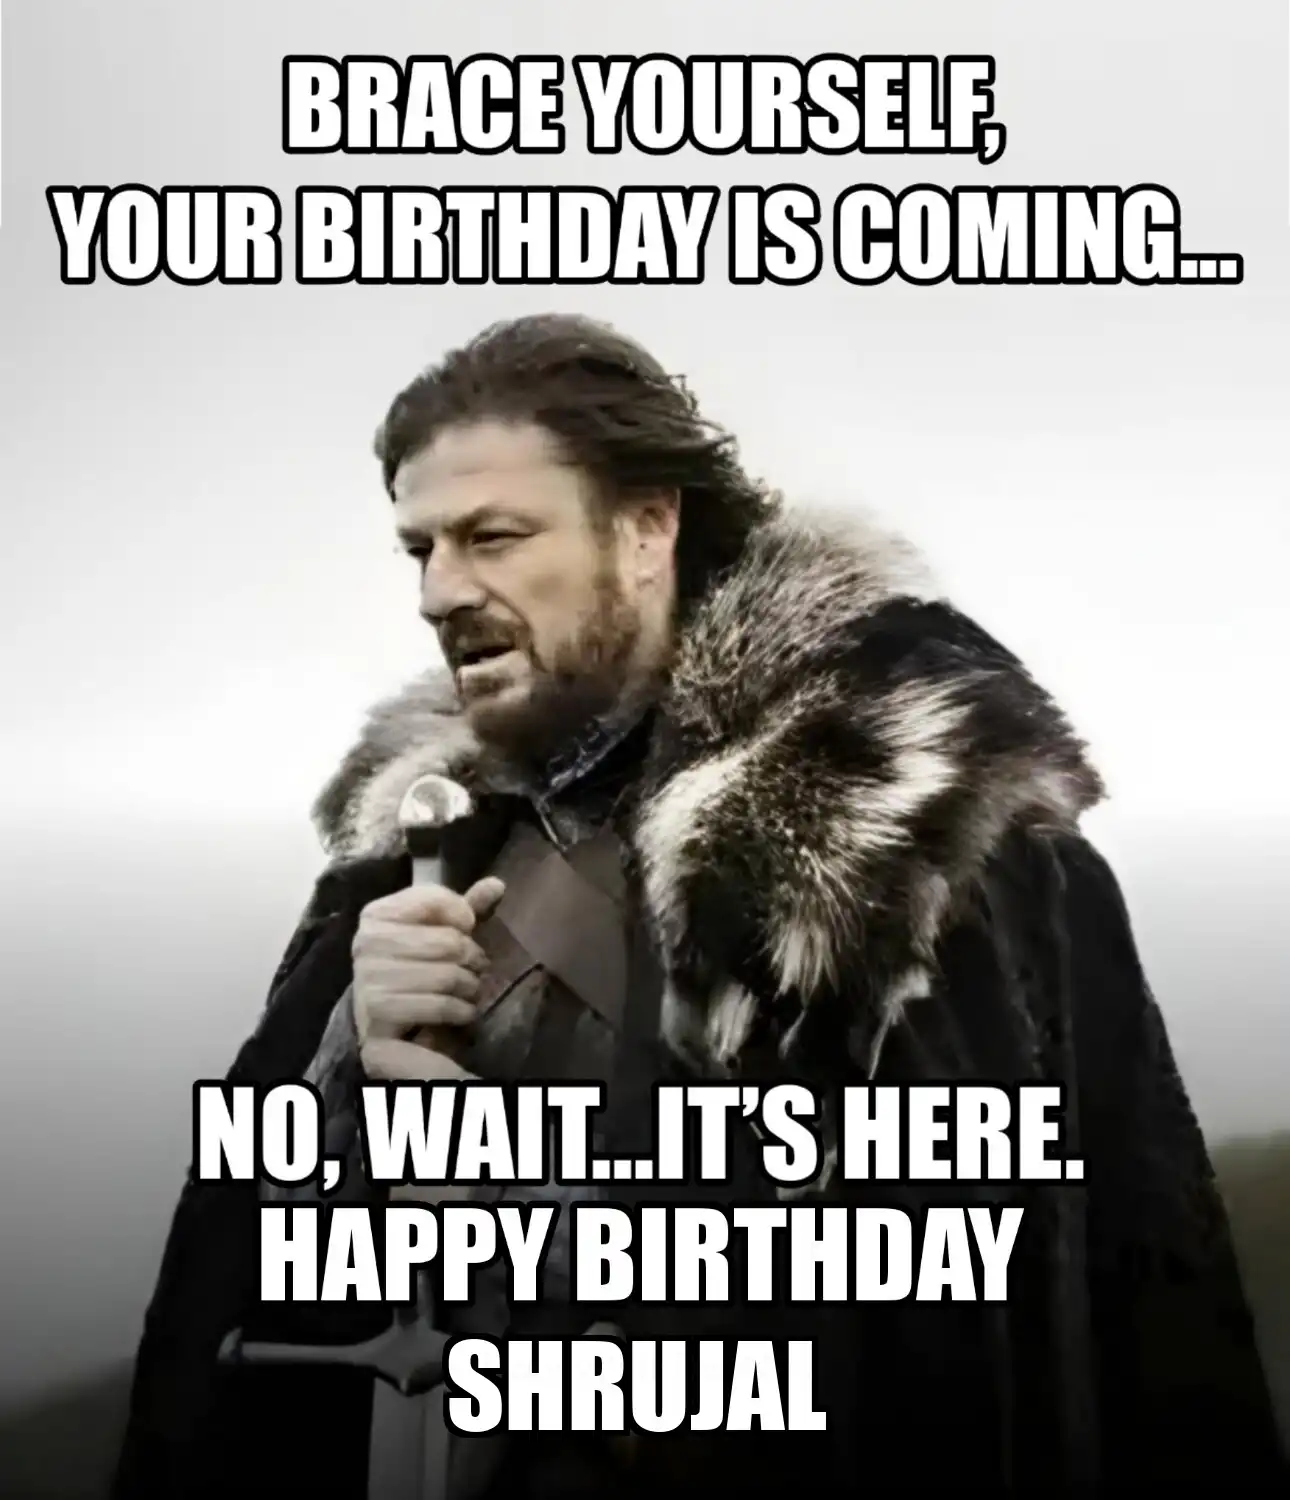 Happy Birthday Shrujal Brace Yourself Your Birthday Is Coming Meme